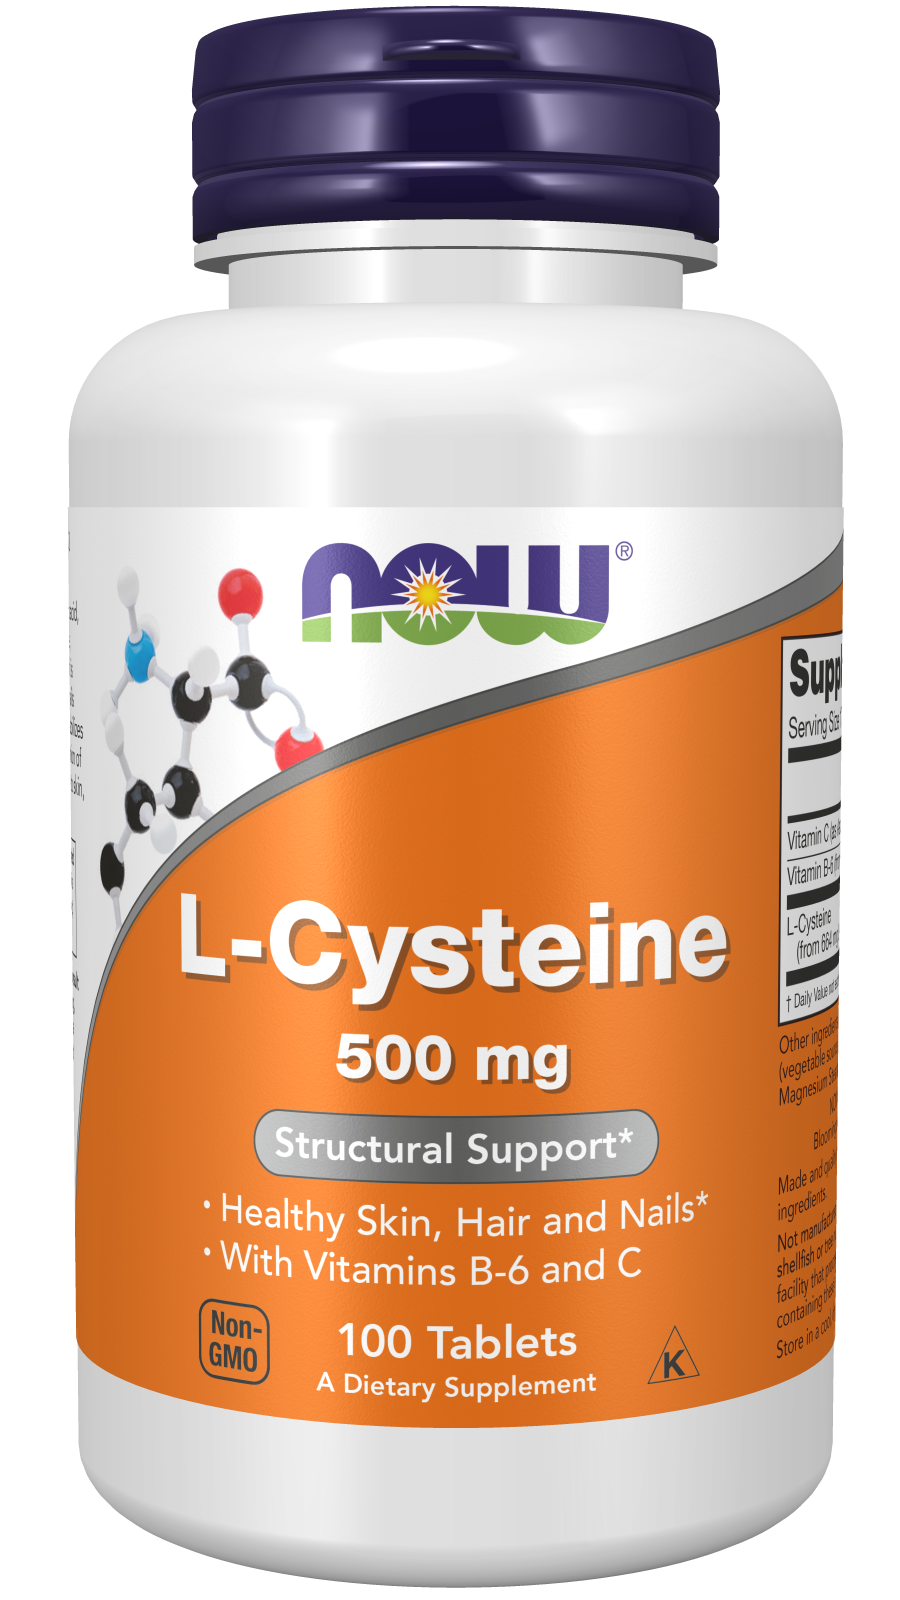 L-Cysteine 500 mg - 100 Tablets Bottle Front